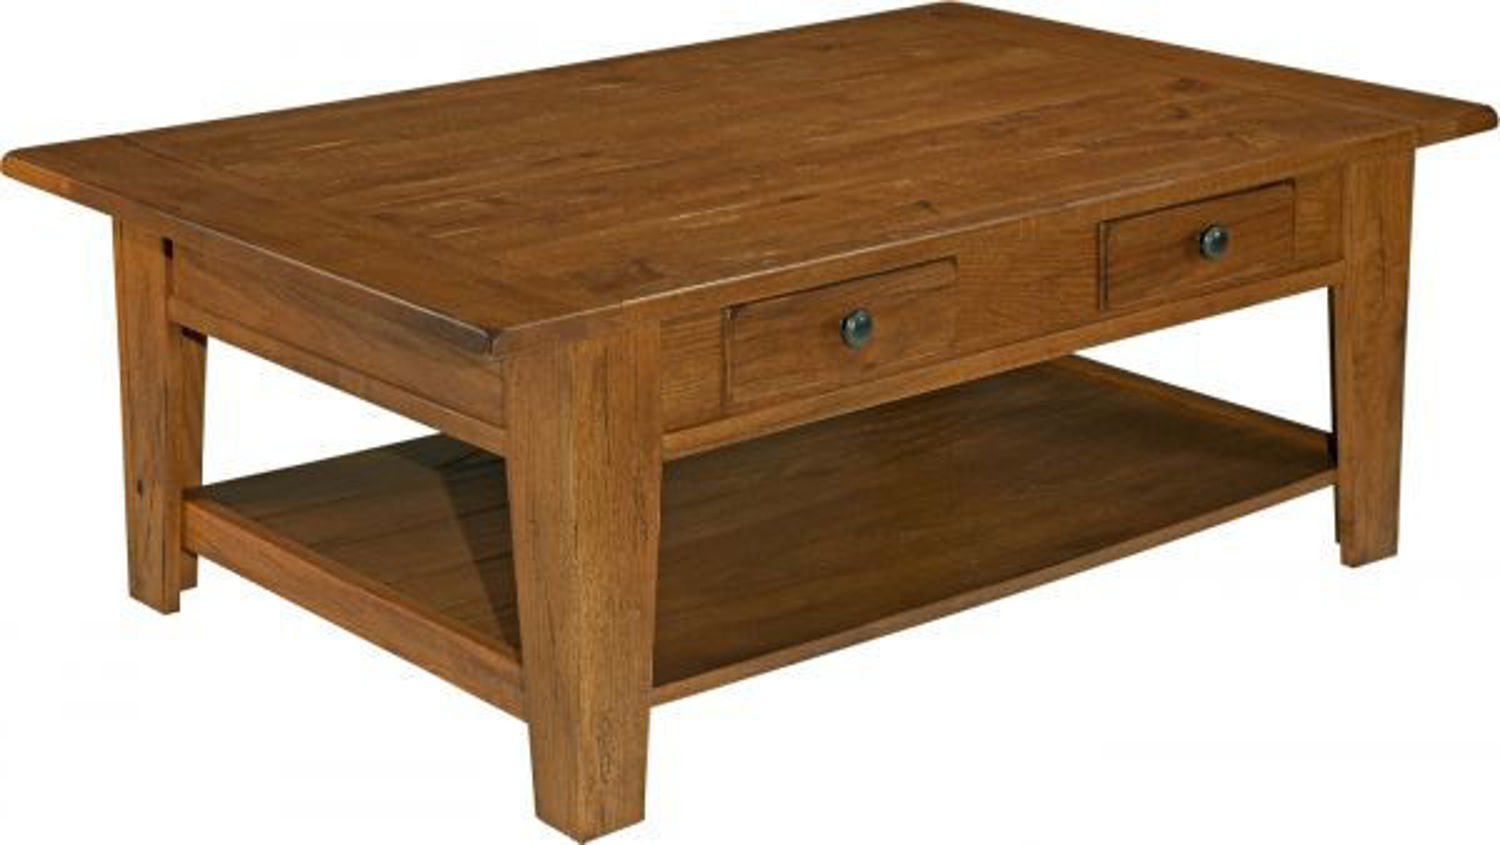 Attic Heirlooms Rectangular Coffee Table By Broyhill Furniture